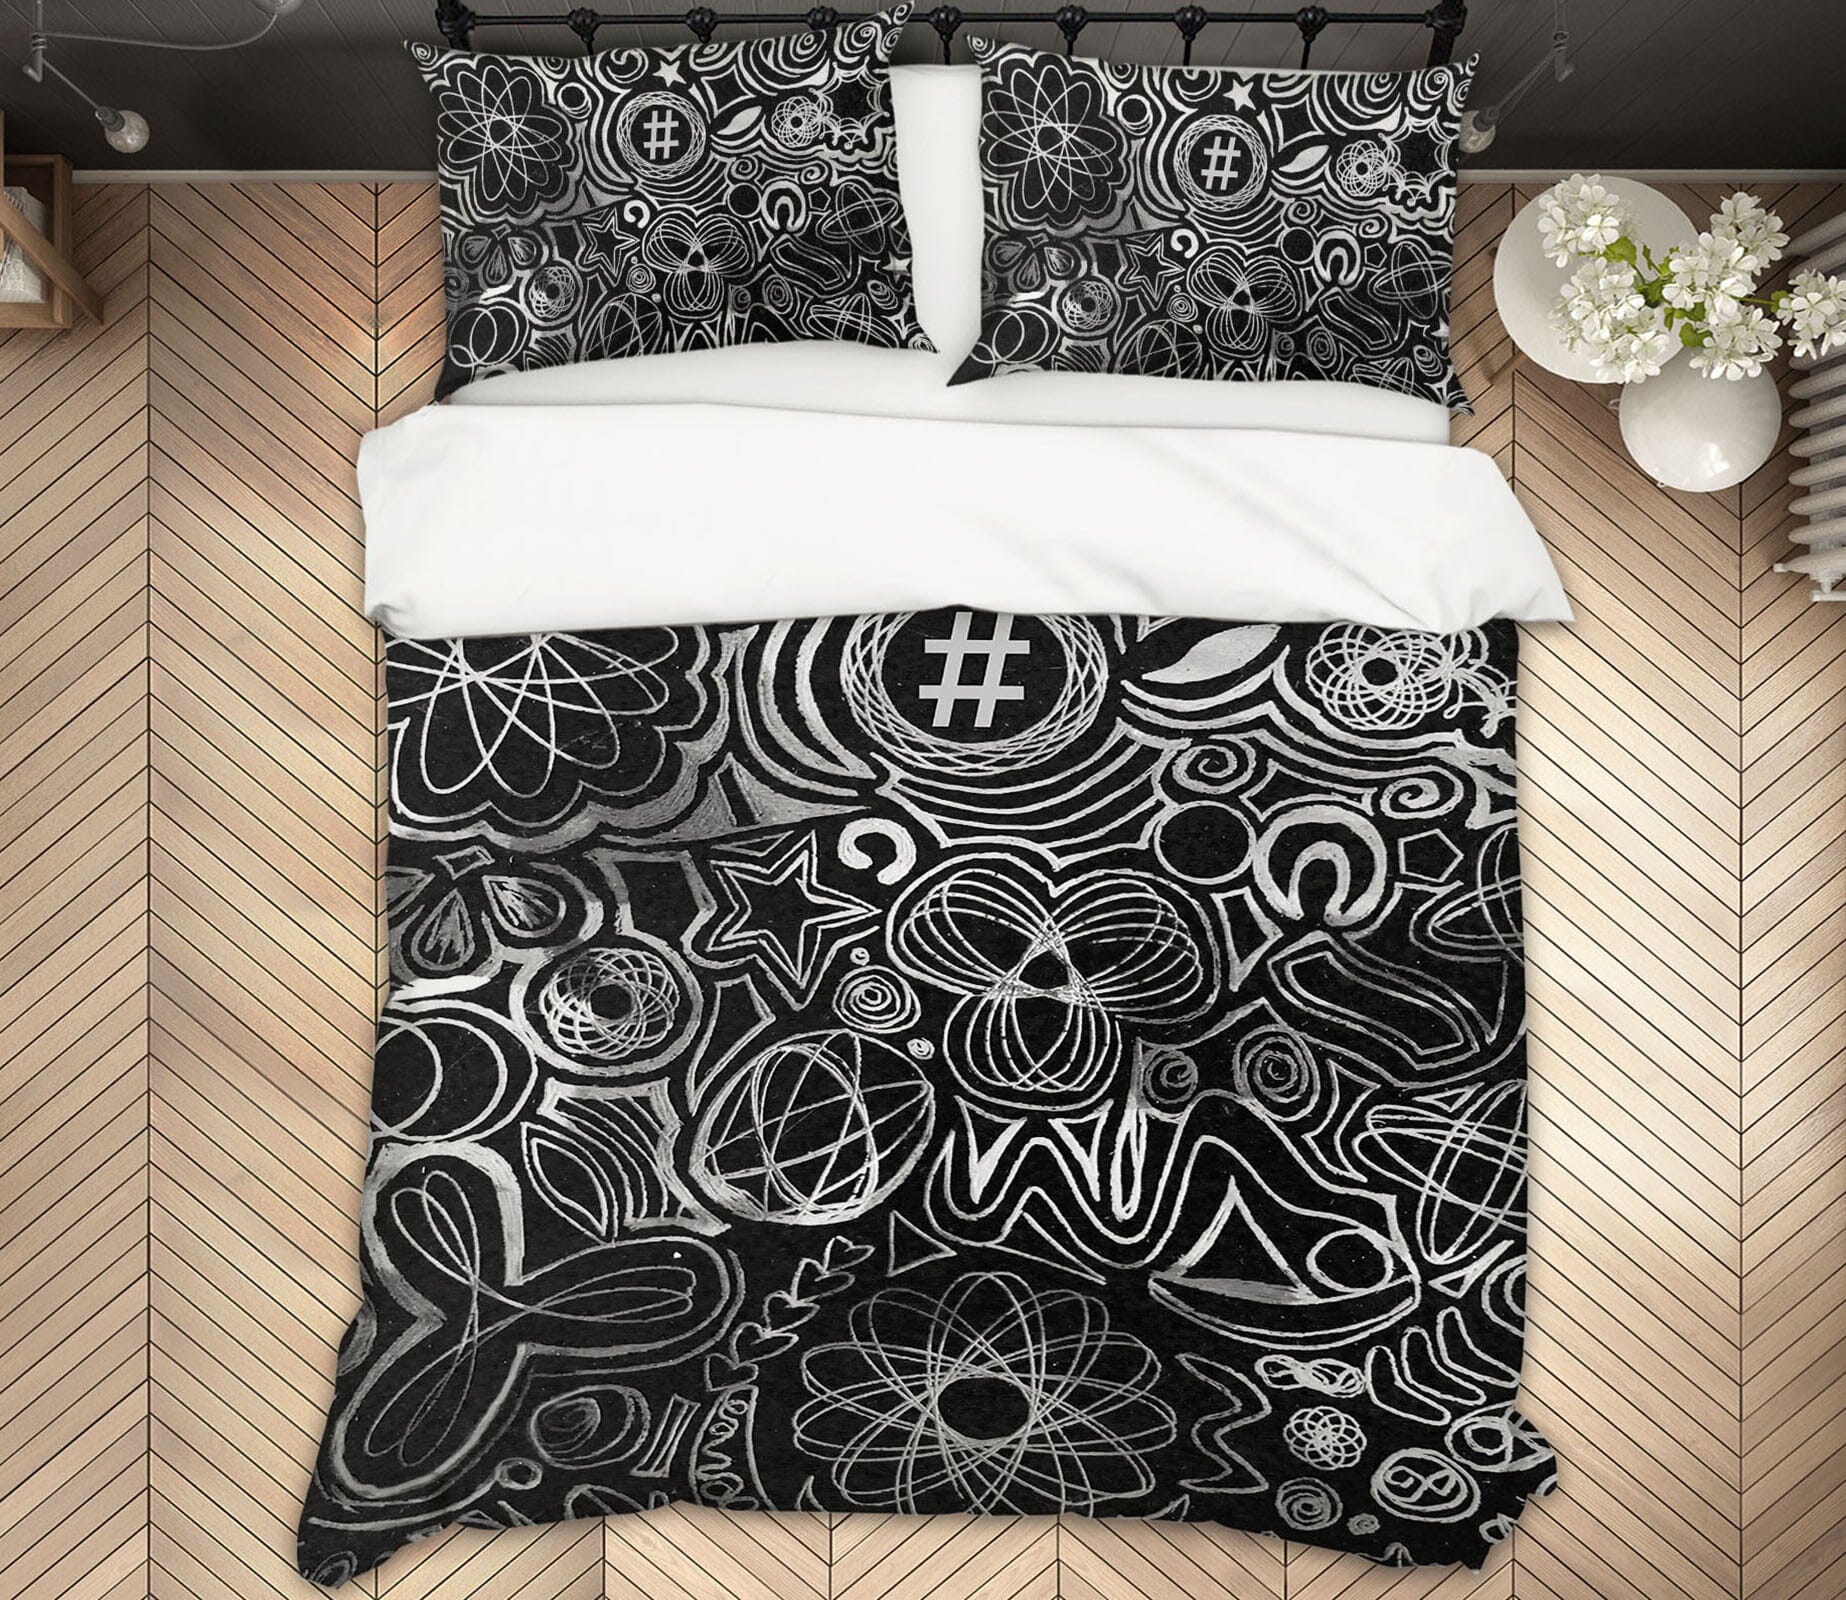 3D Line Pattern 2008 Shandra Smith Bedding Bed Pillowcases Quilt Quiet Covers AJ Creativity Home 